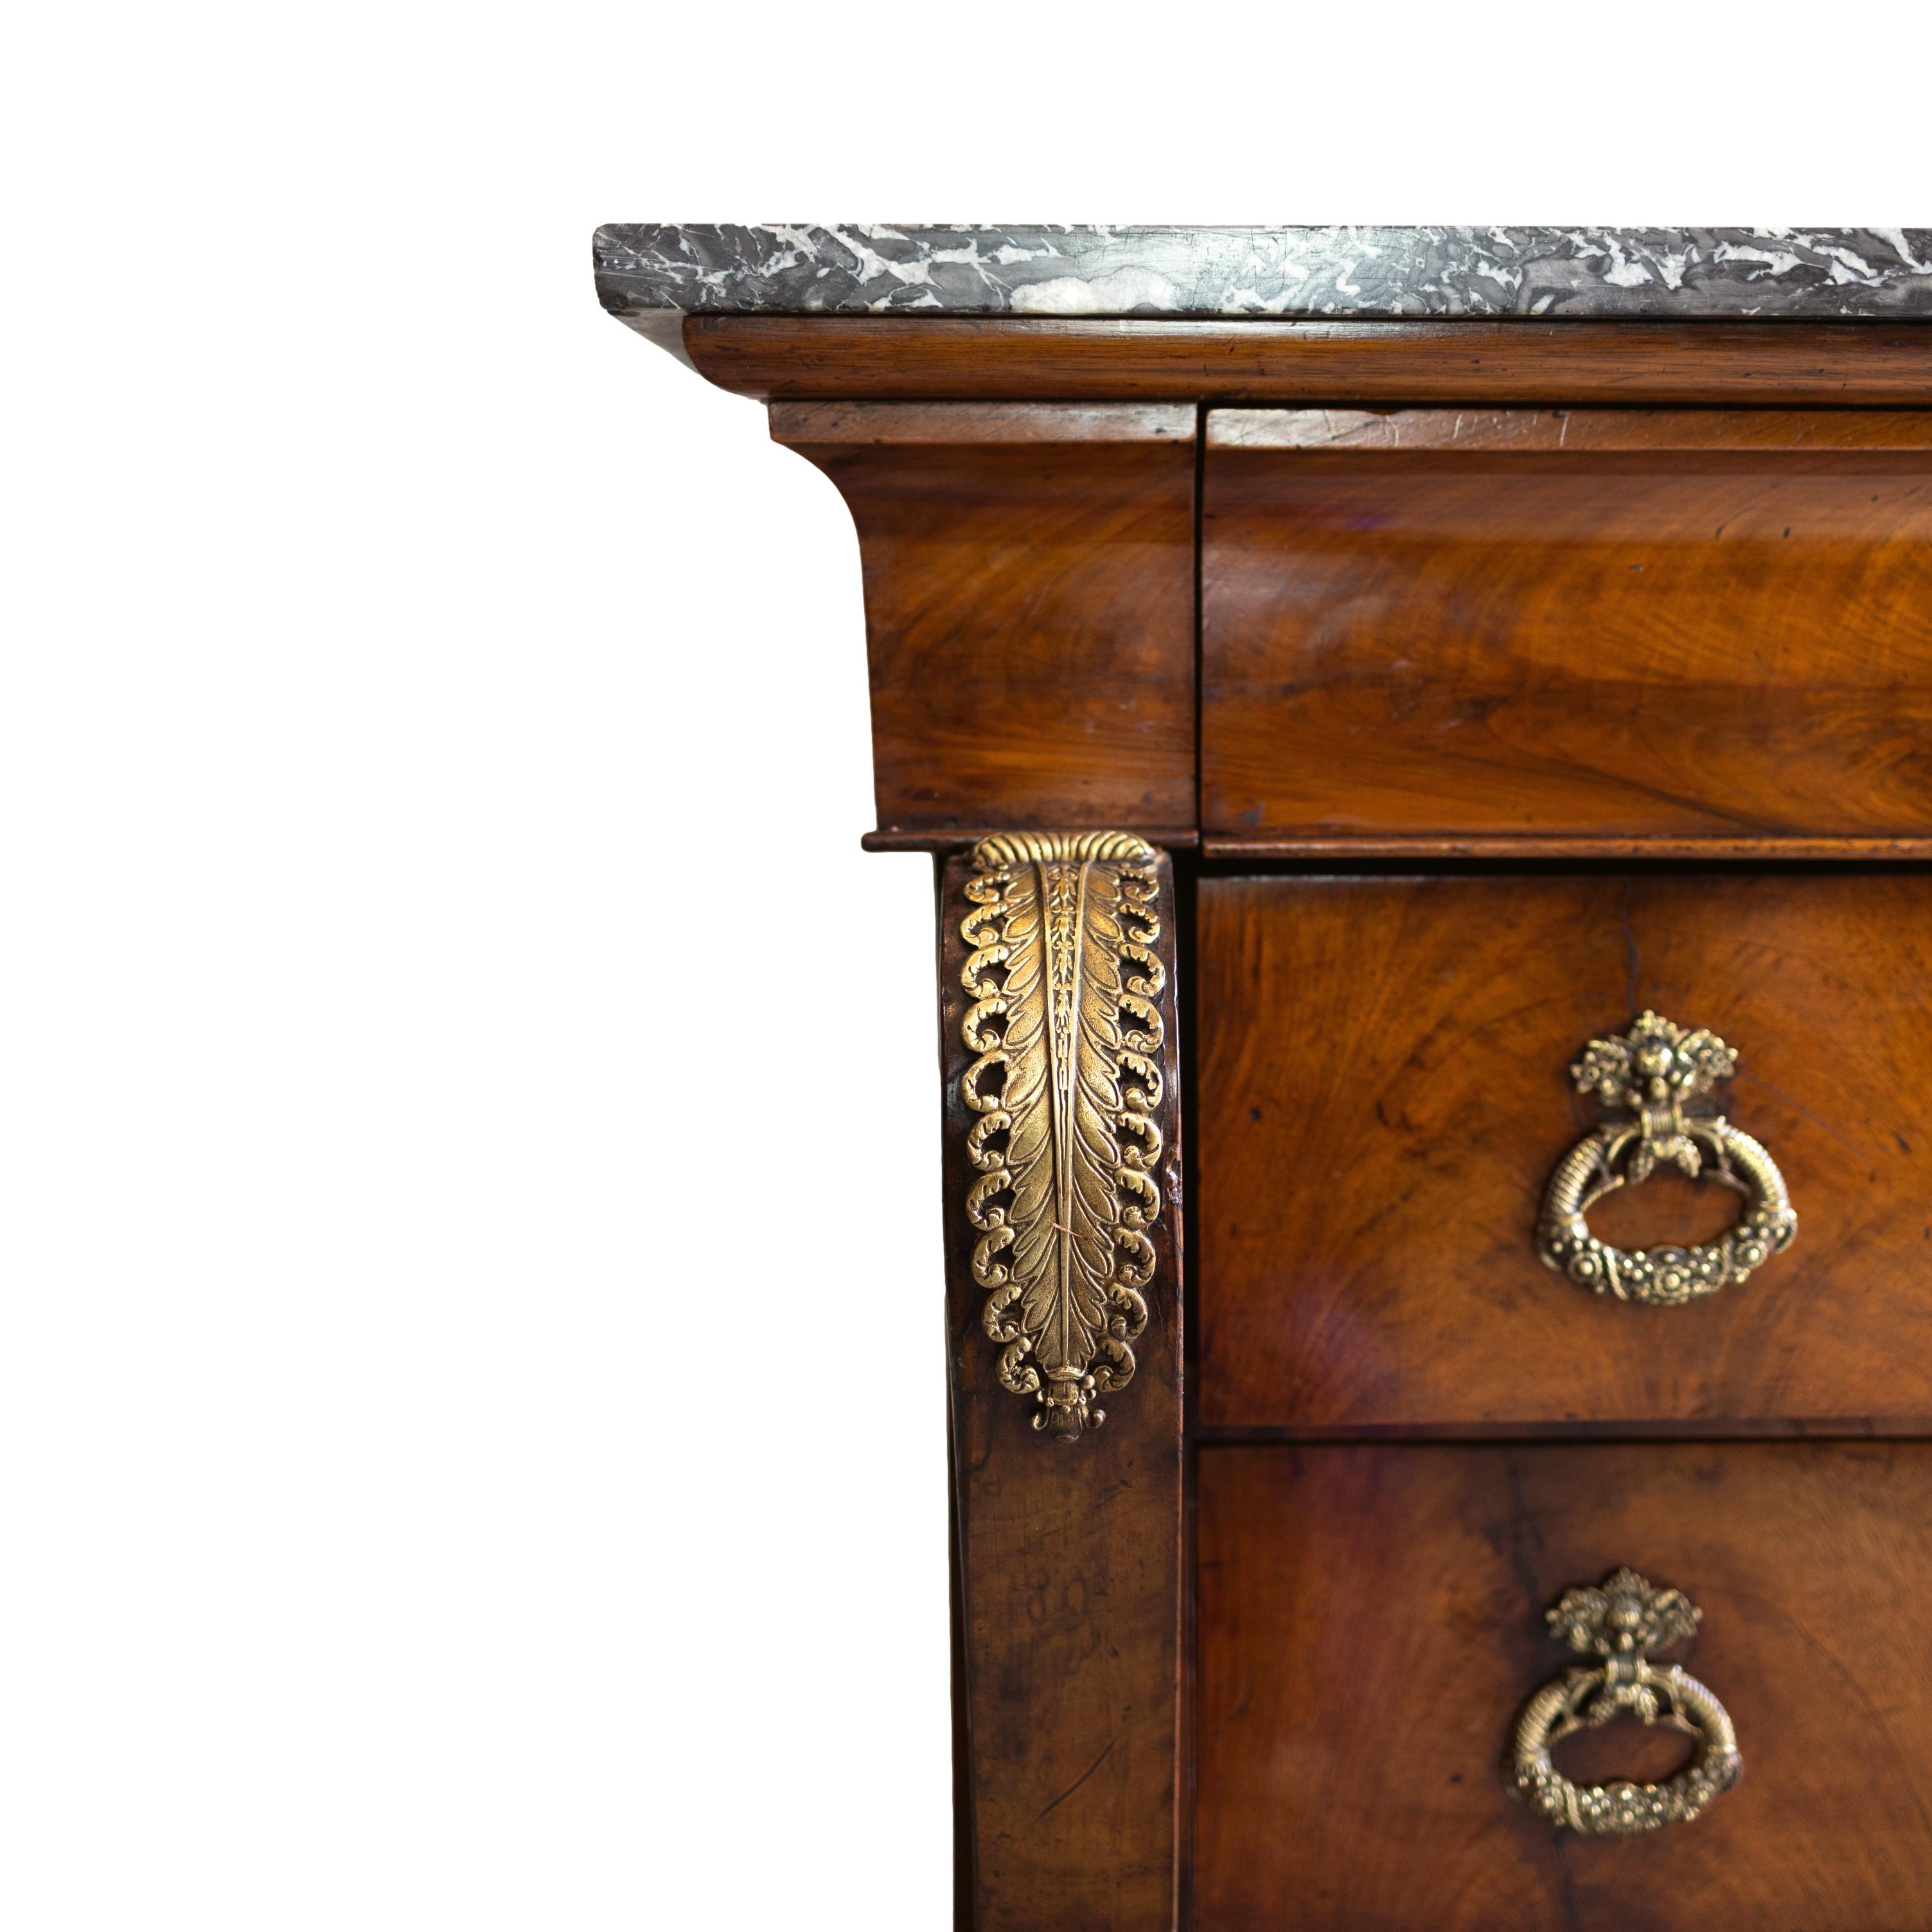 An Empire Ormolu-Mounted Mahogany Commode, Marble Top, French, ca. 1820 For Sale 3